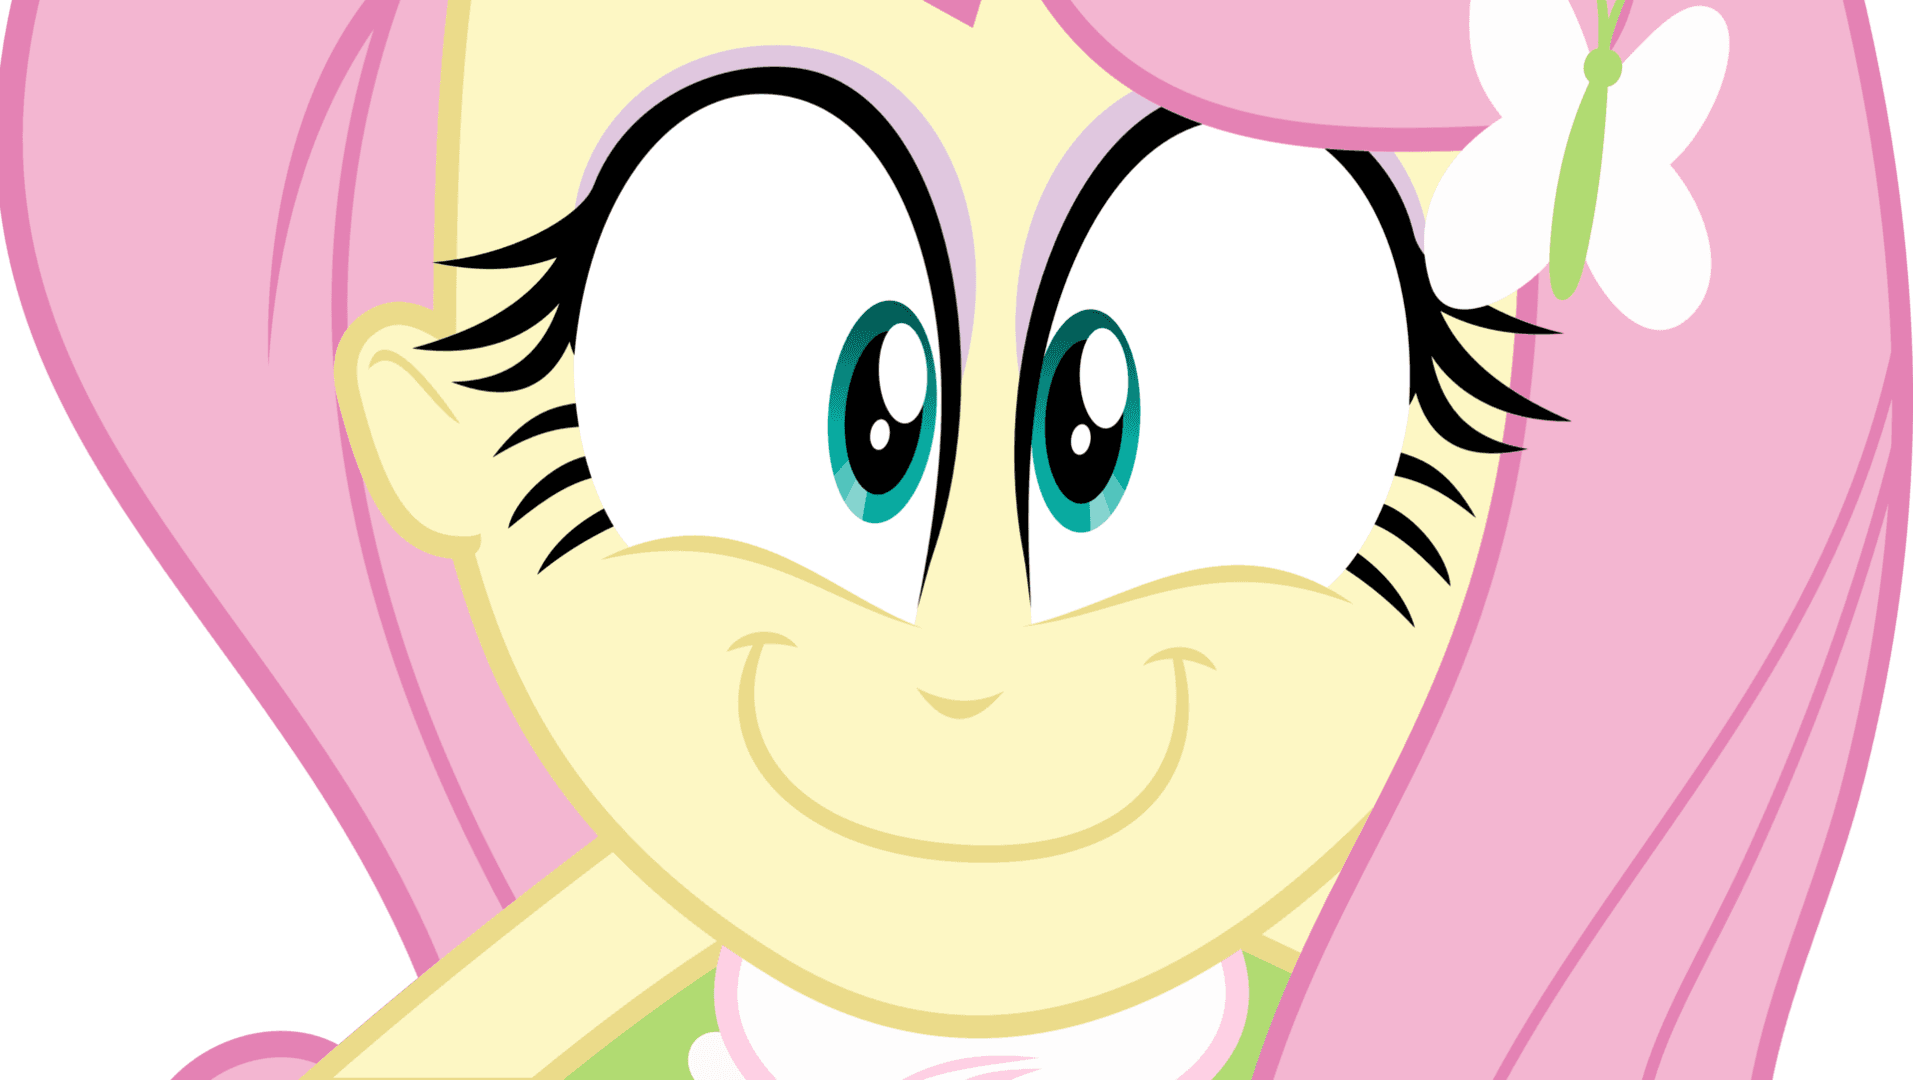 fluttershy__the_longer_you_stare____by_strumfreak-d6hq245.png